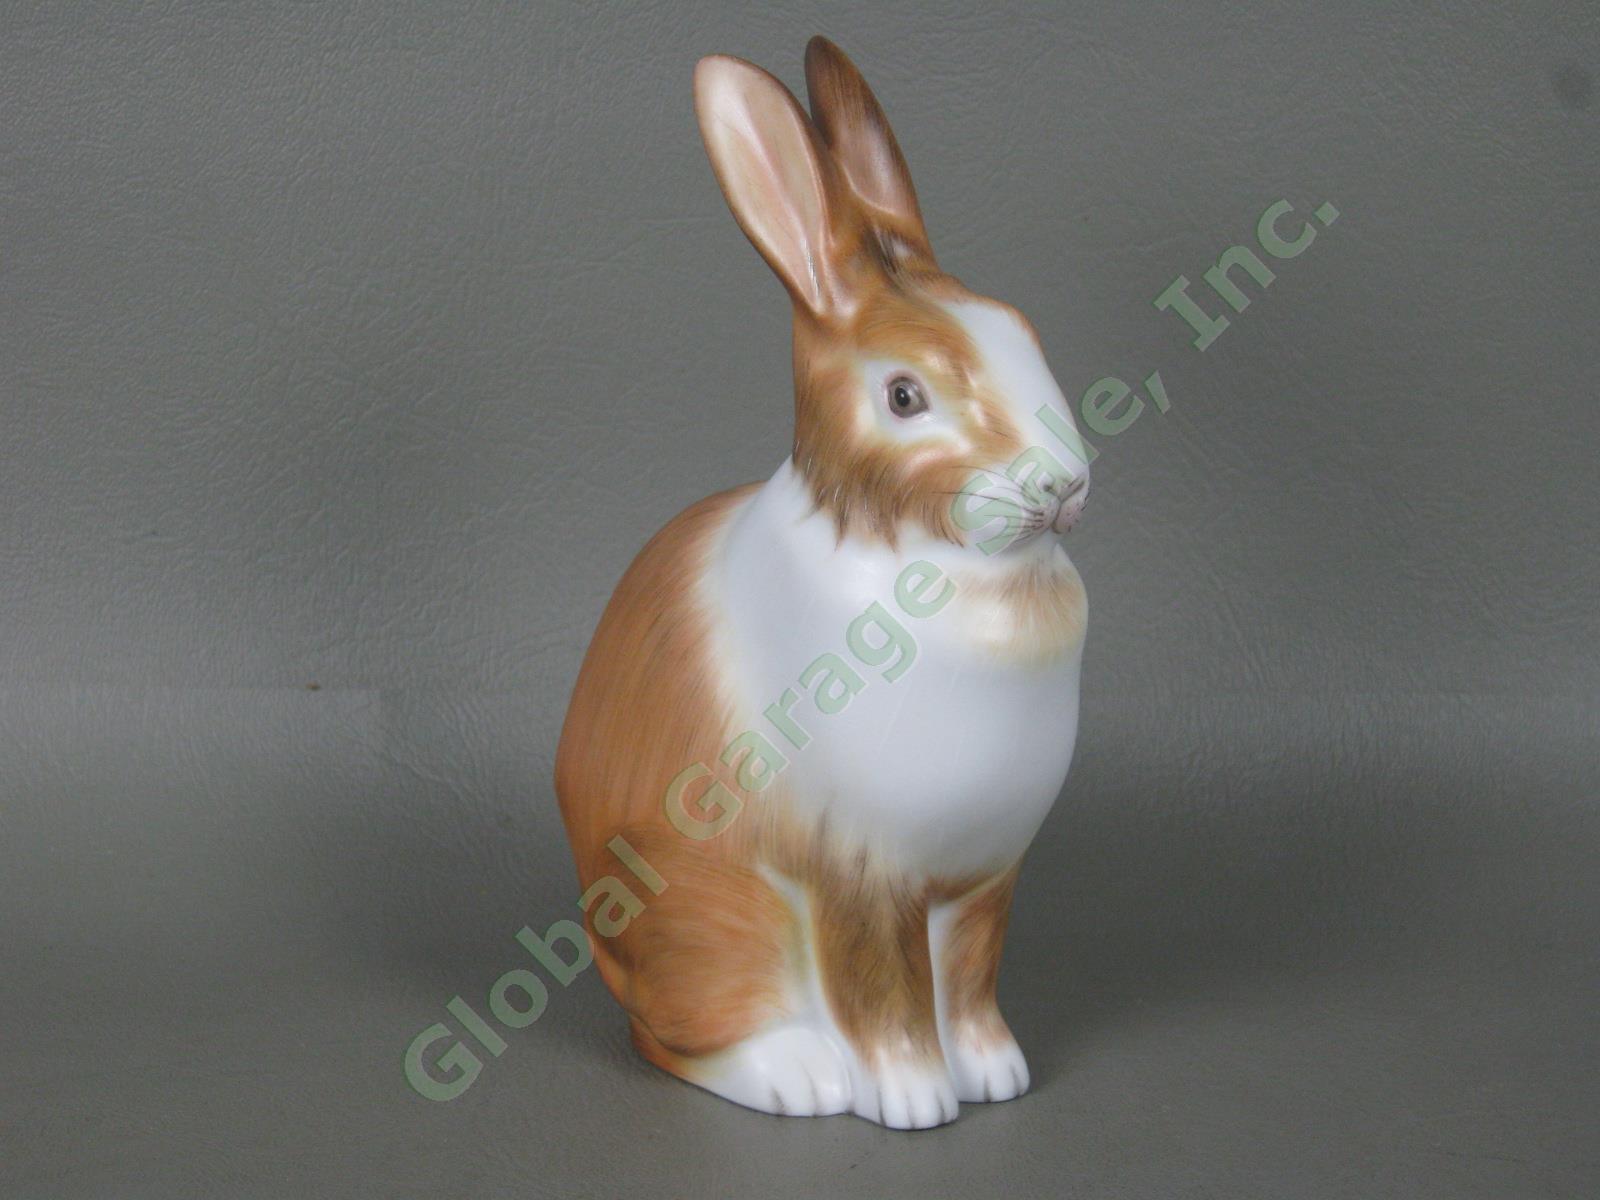 Herend Brown & White Handpainted 5.5" Porcelain Rabbit Figurine No Reserve Price